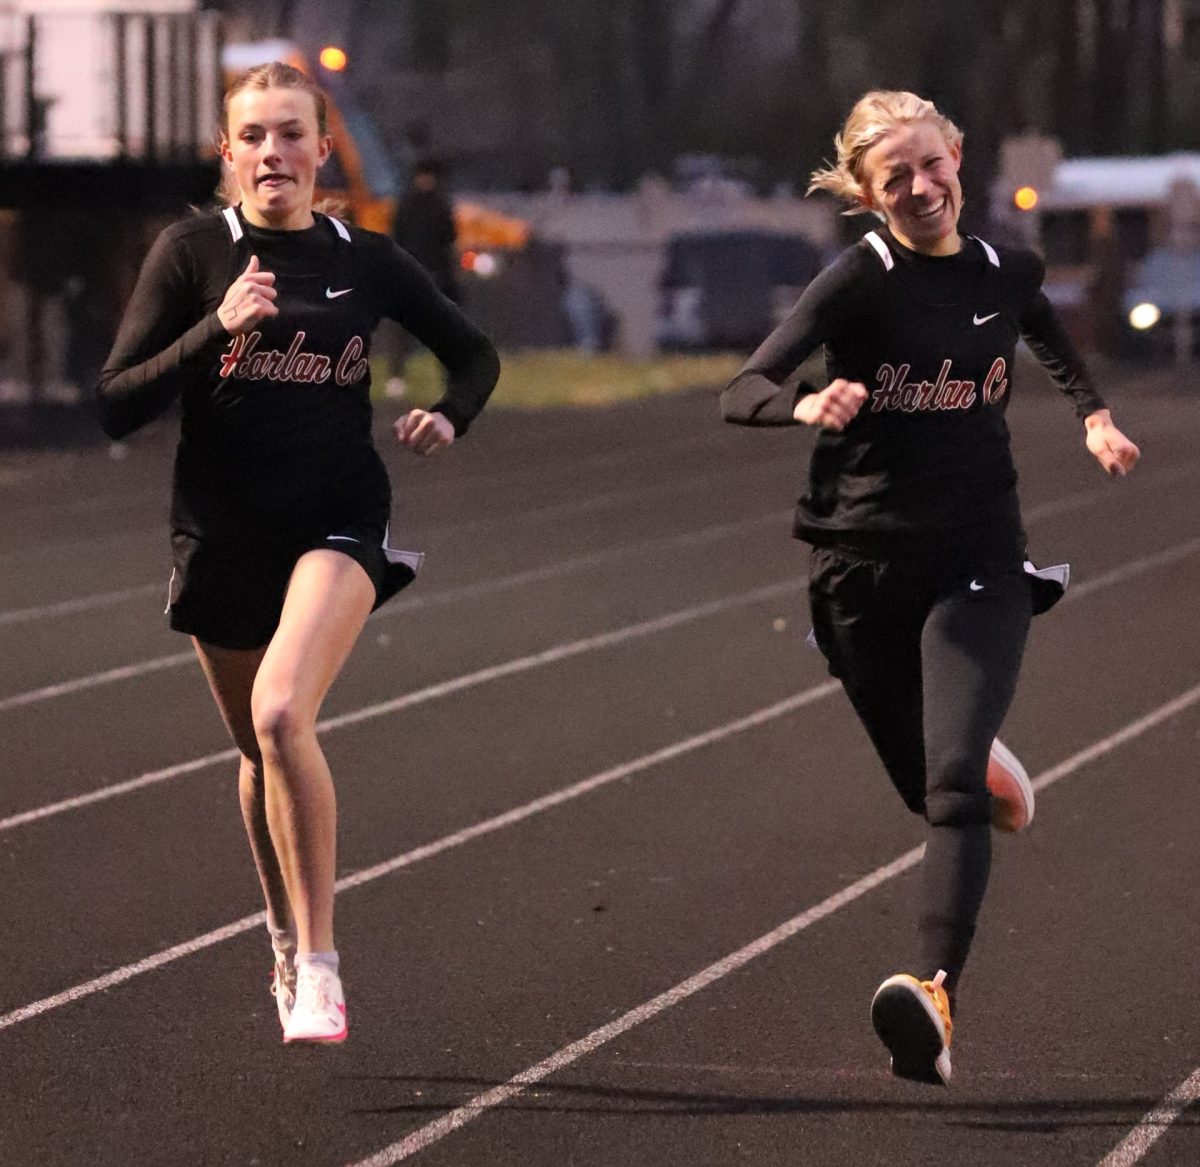 Lauren Lewis (left) will represent Harlan County in three races this weekend at the 2A state meet while Peyton Lunsford will compete in four events.